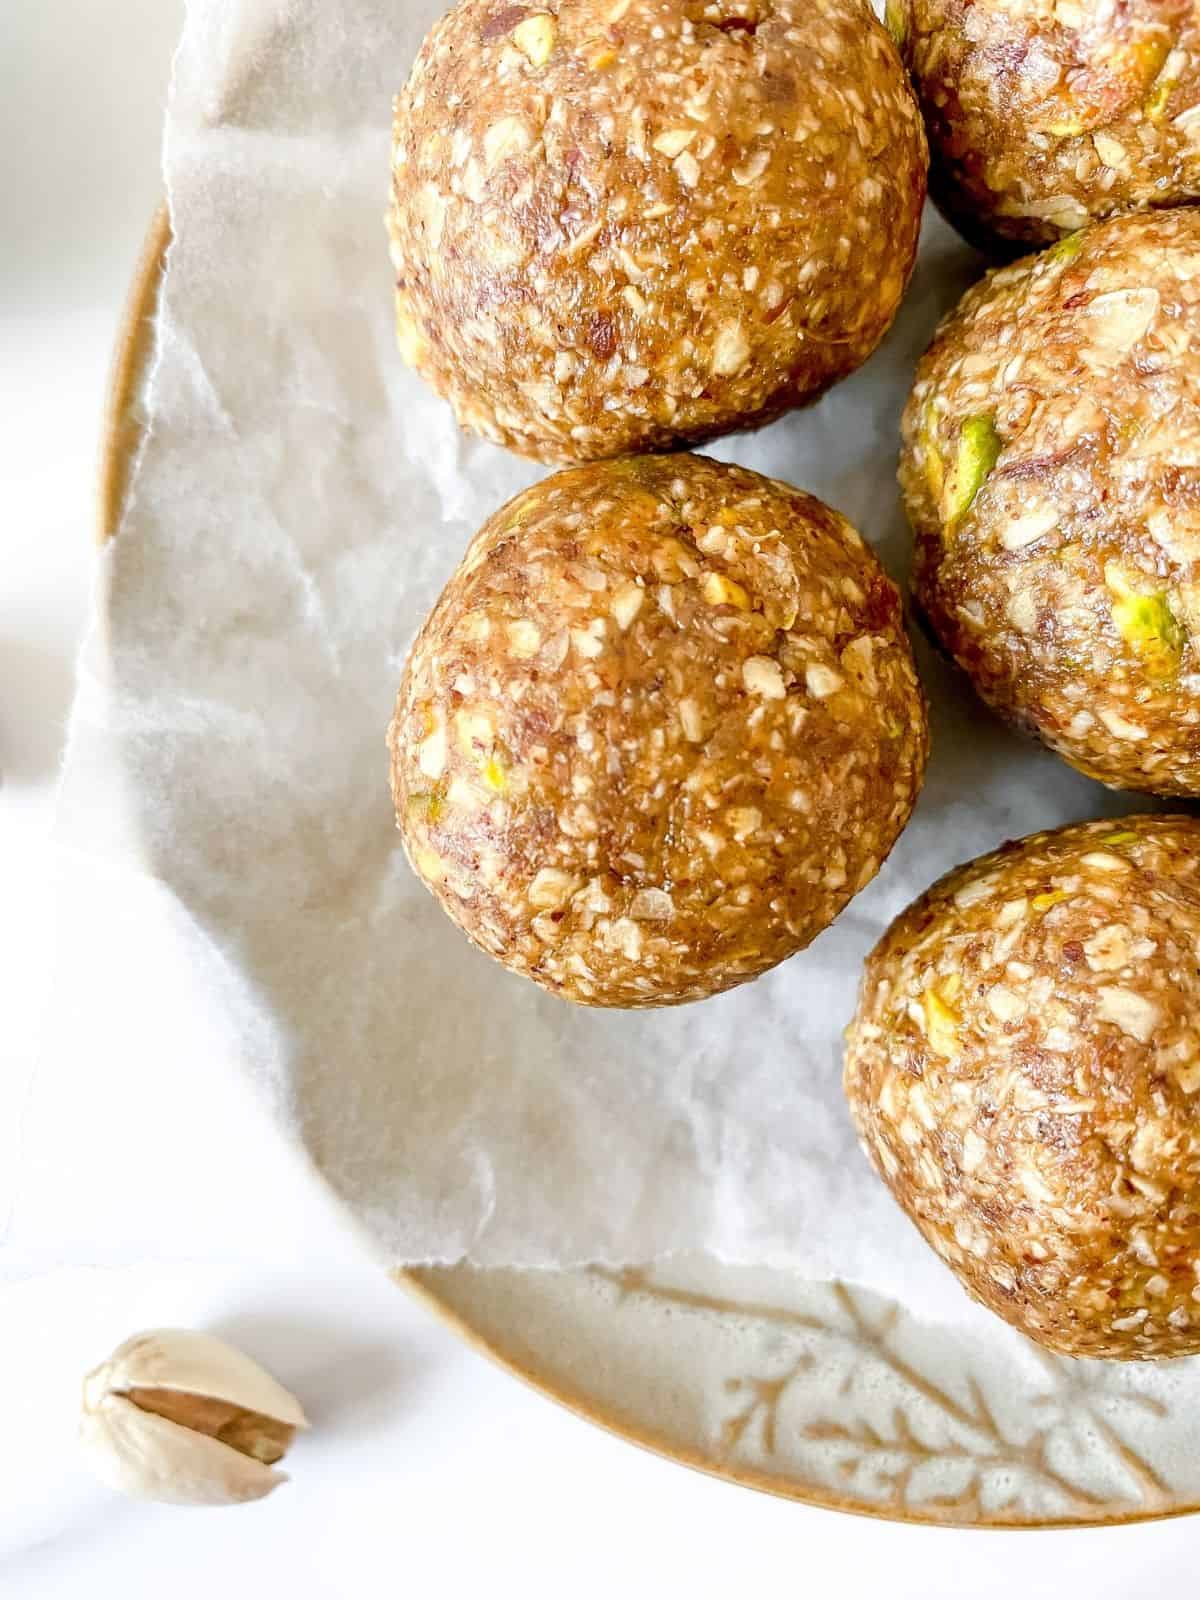 cardamom pistachio energy balls on a brown plate.